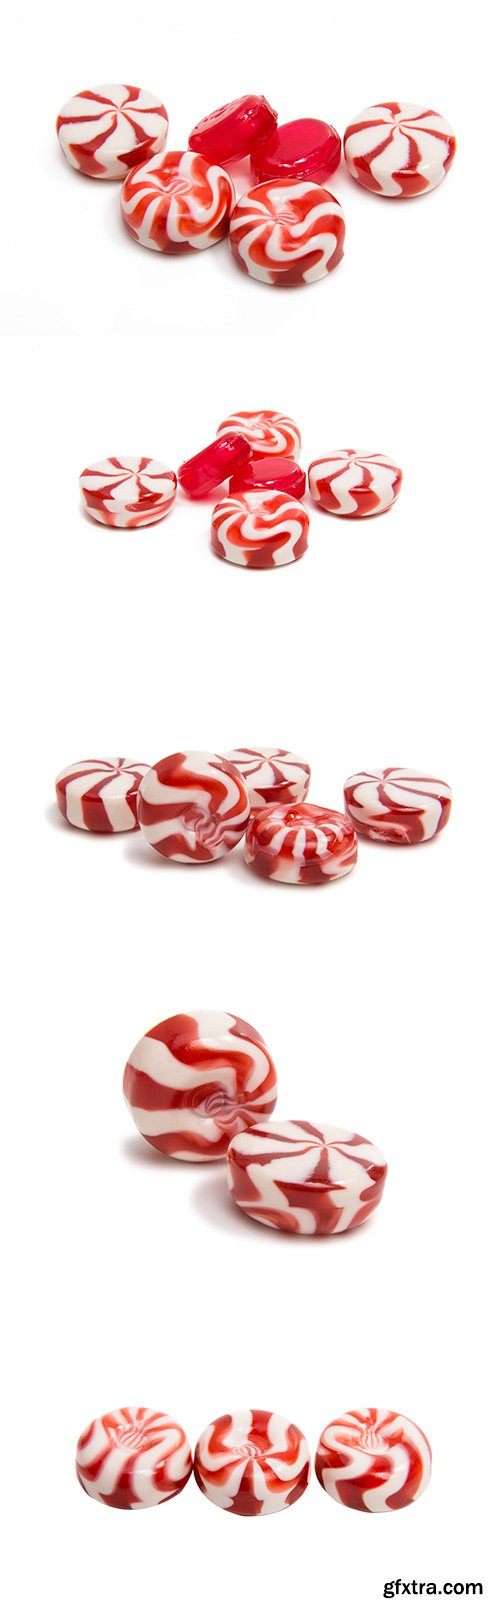 Colored Candy Isolated - 11xJPGs